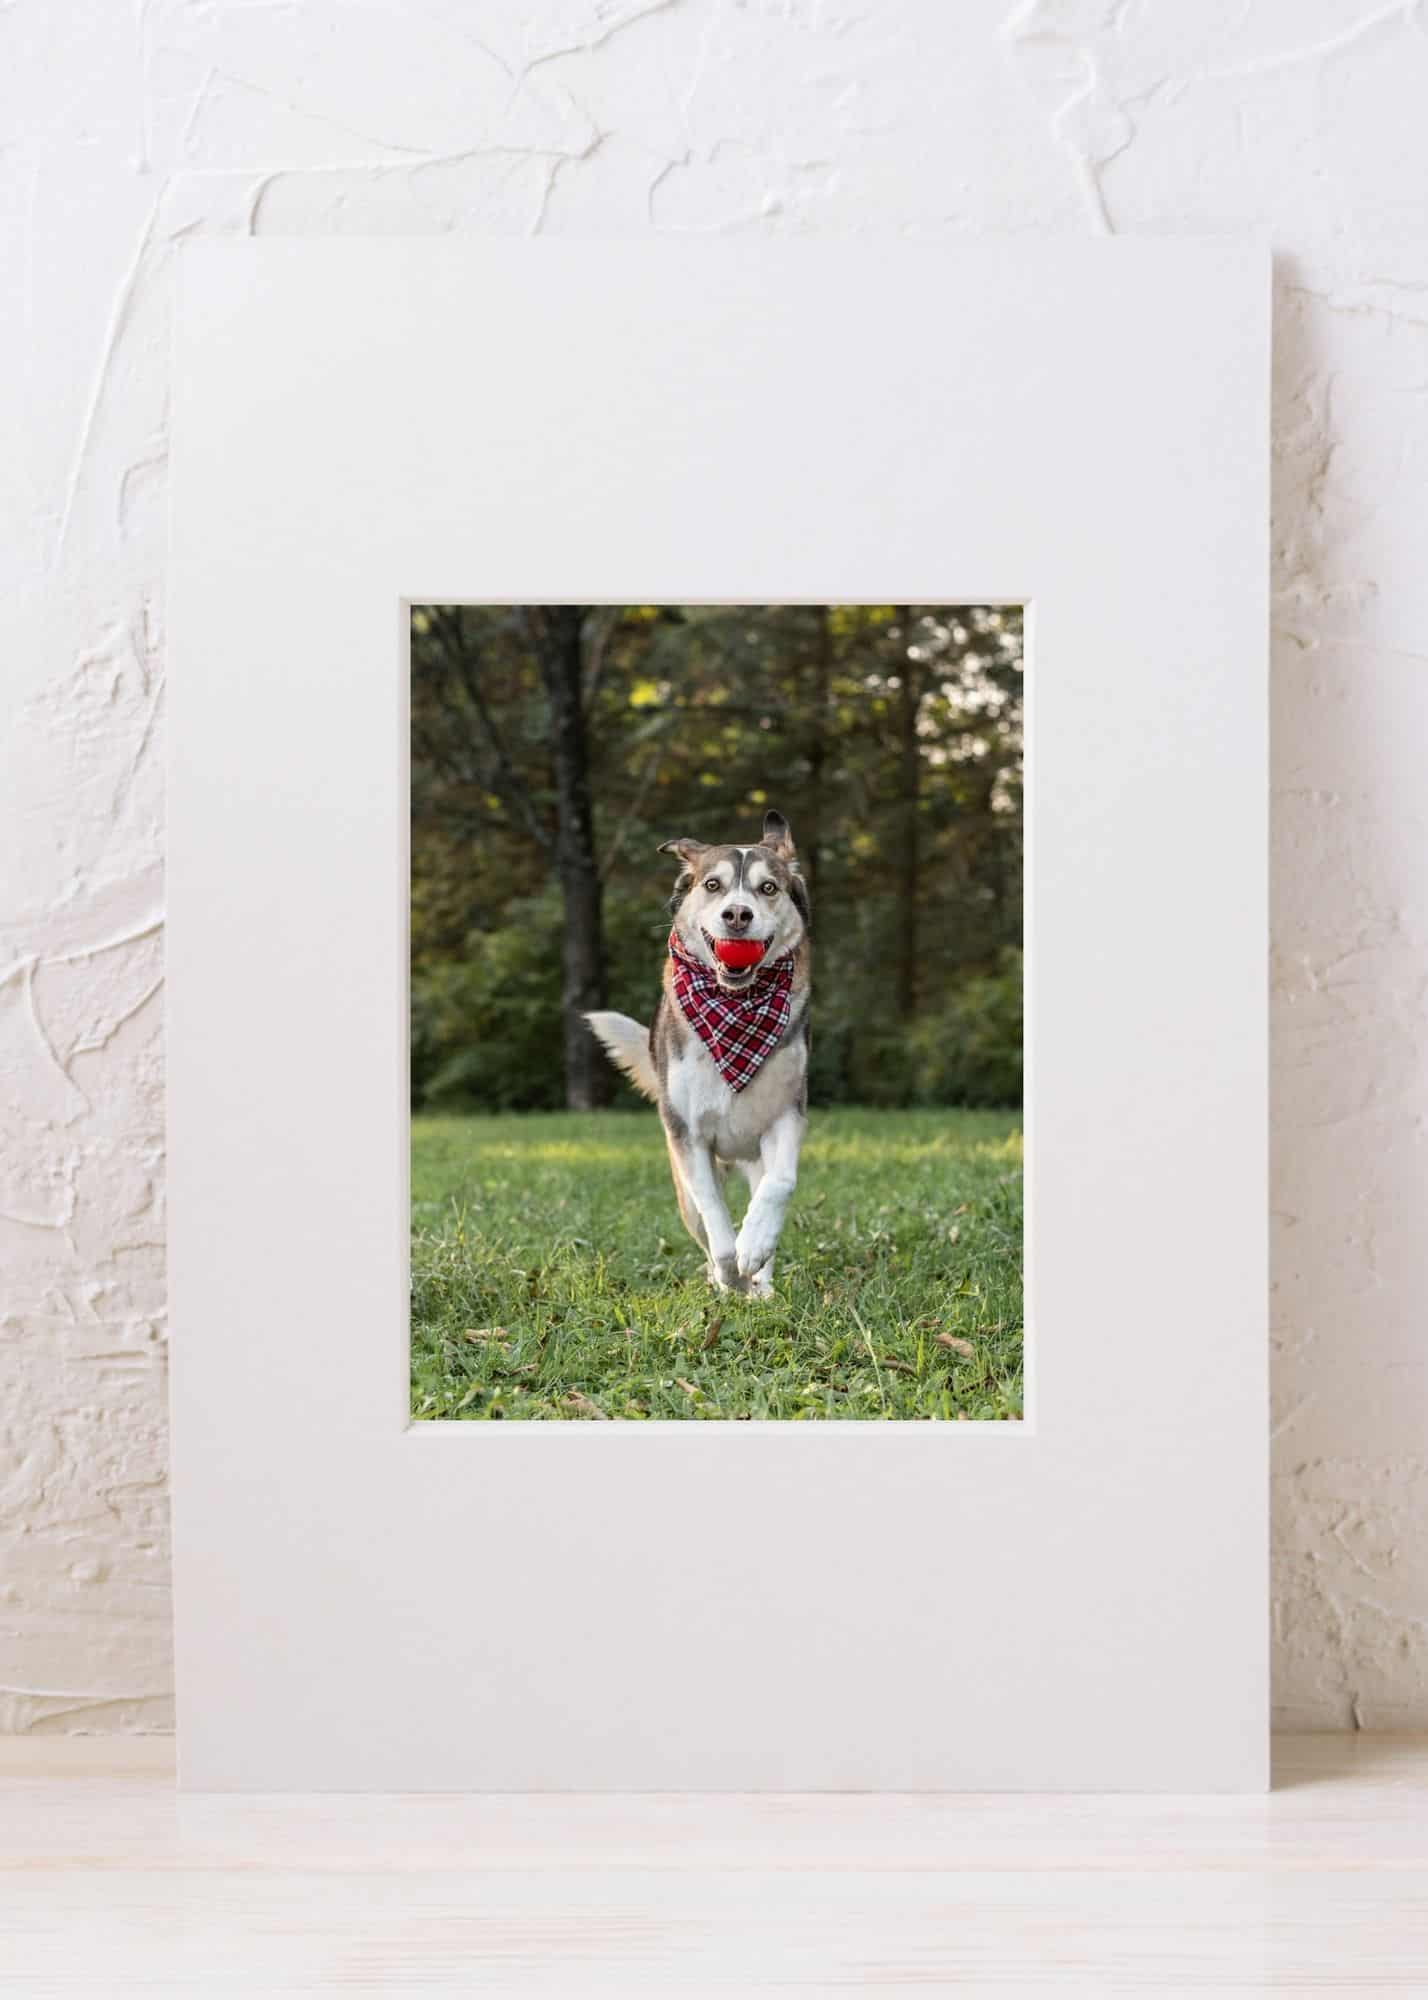 5x7 matted gift print of a running dog against a white wall